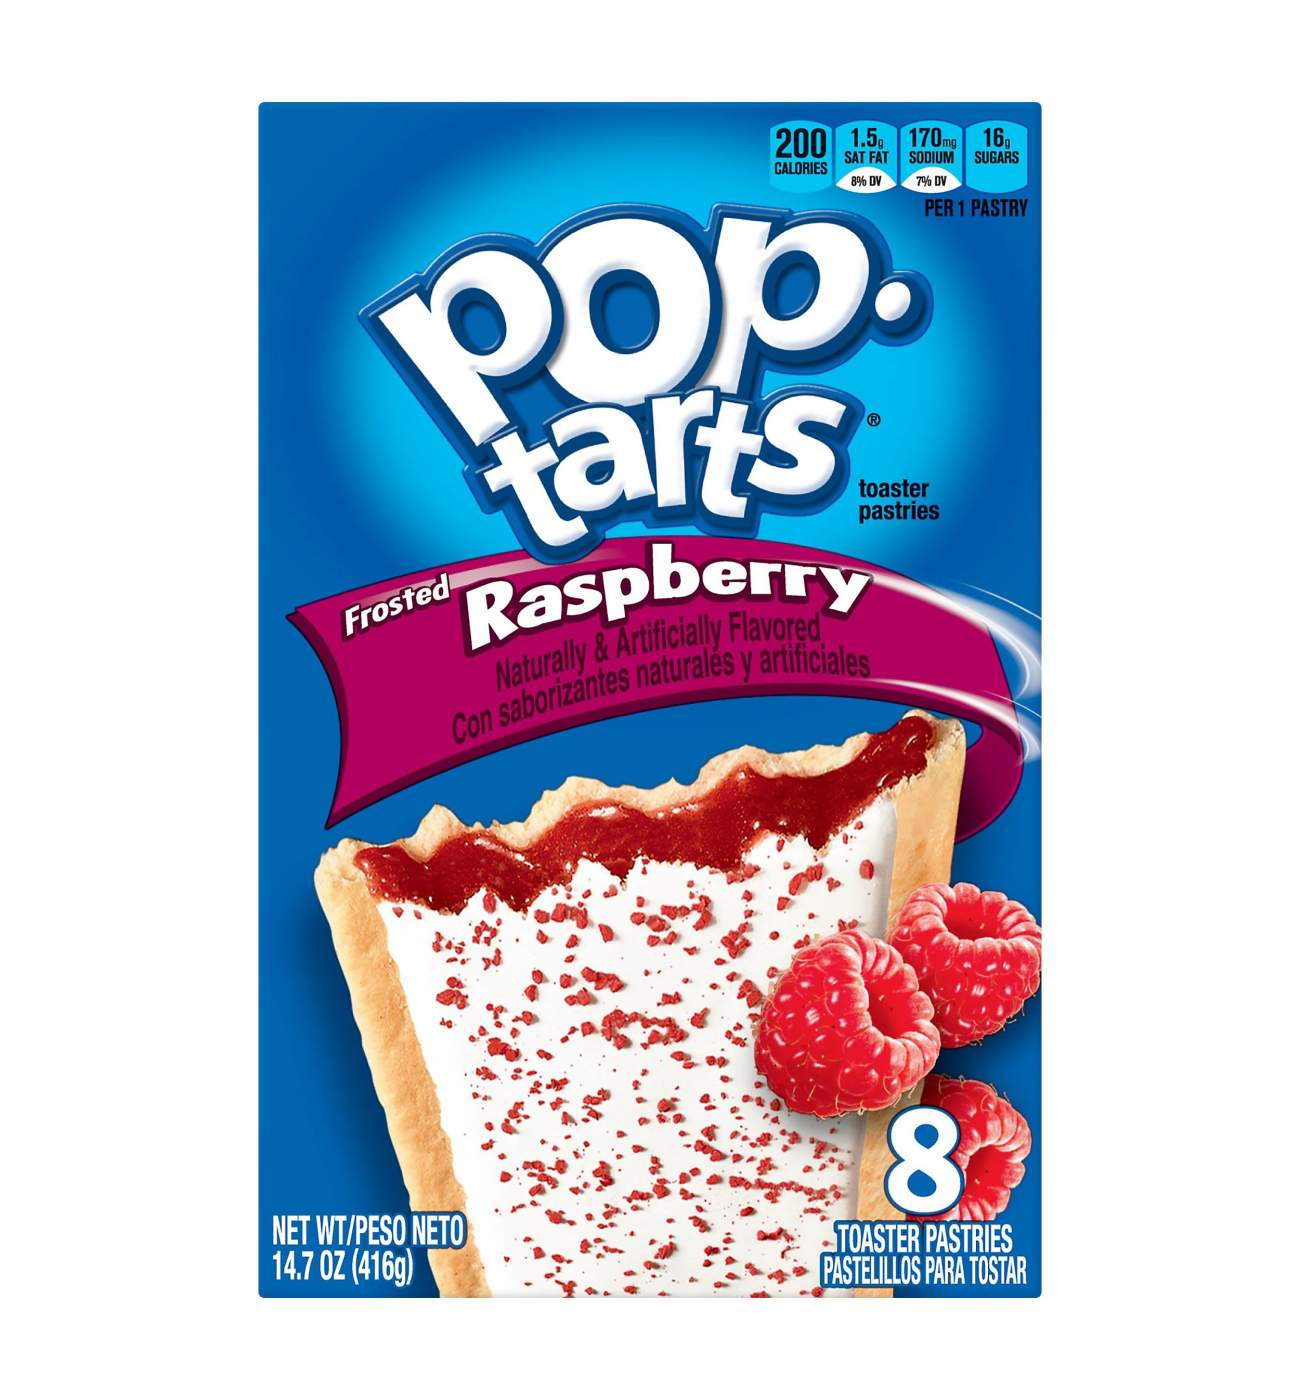 Pop-Tarts Frosted Raspberry Toaster Pastries; image 1 of 2